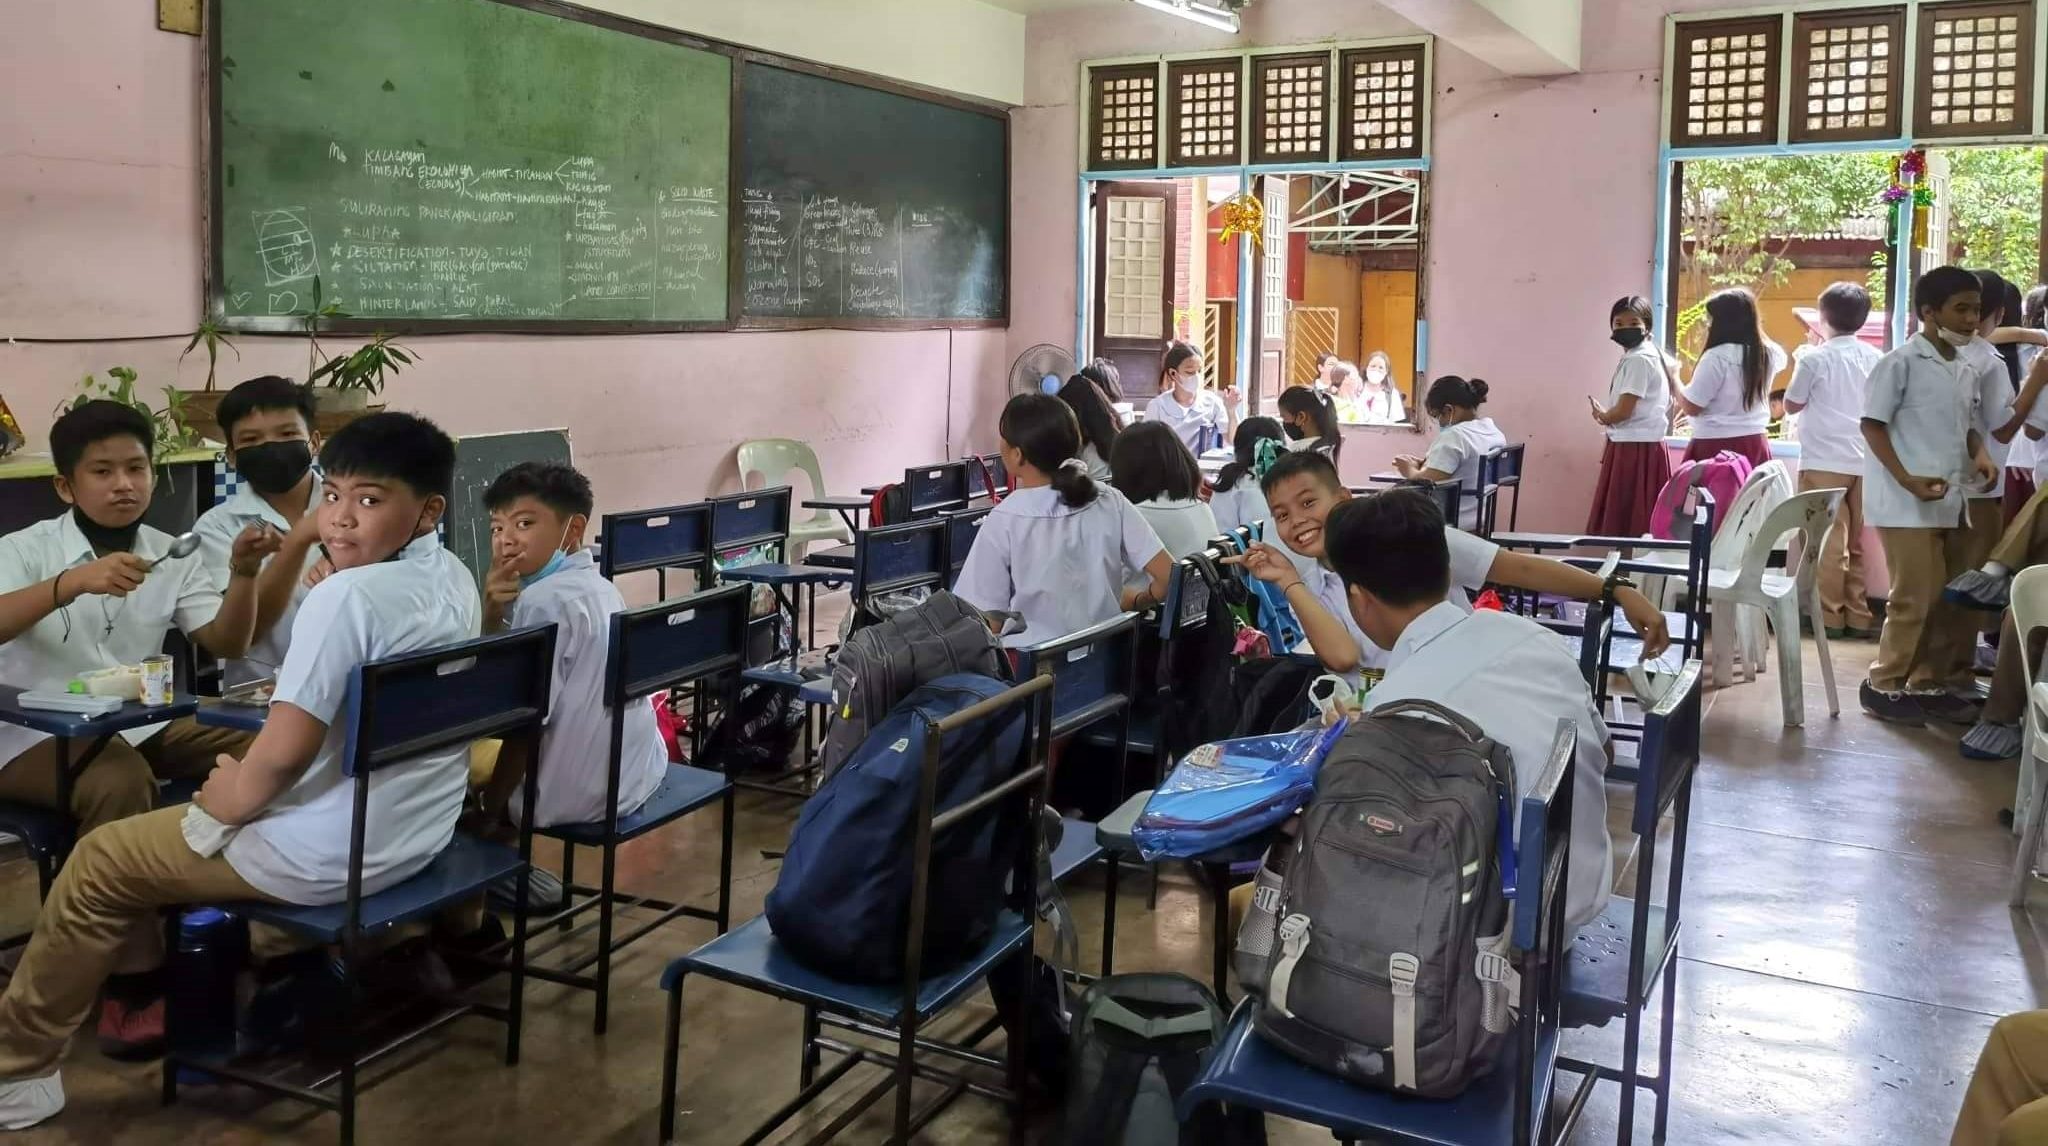 The Department of Education (DepEd) has released the guidelines for public schools seeking exemption from the full implementation of in-person classes.